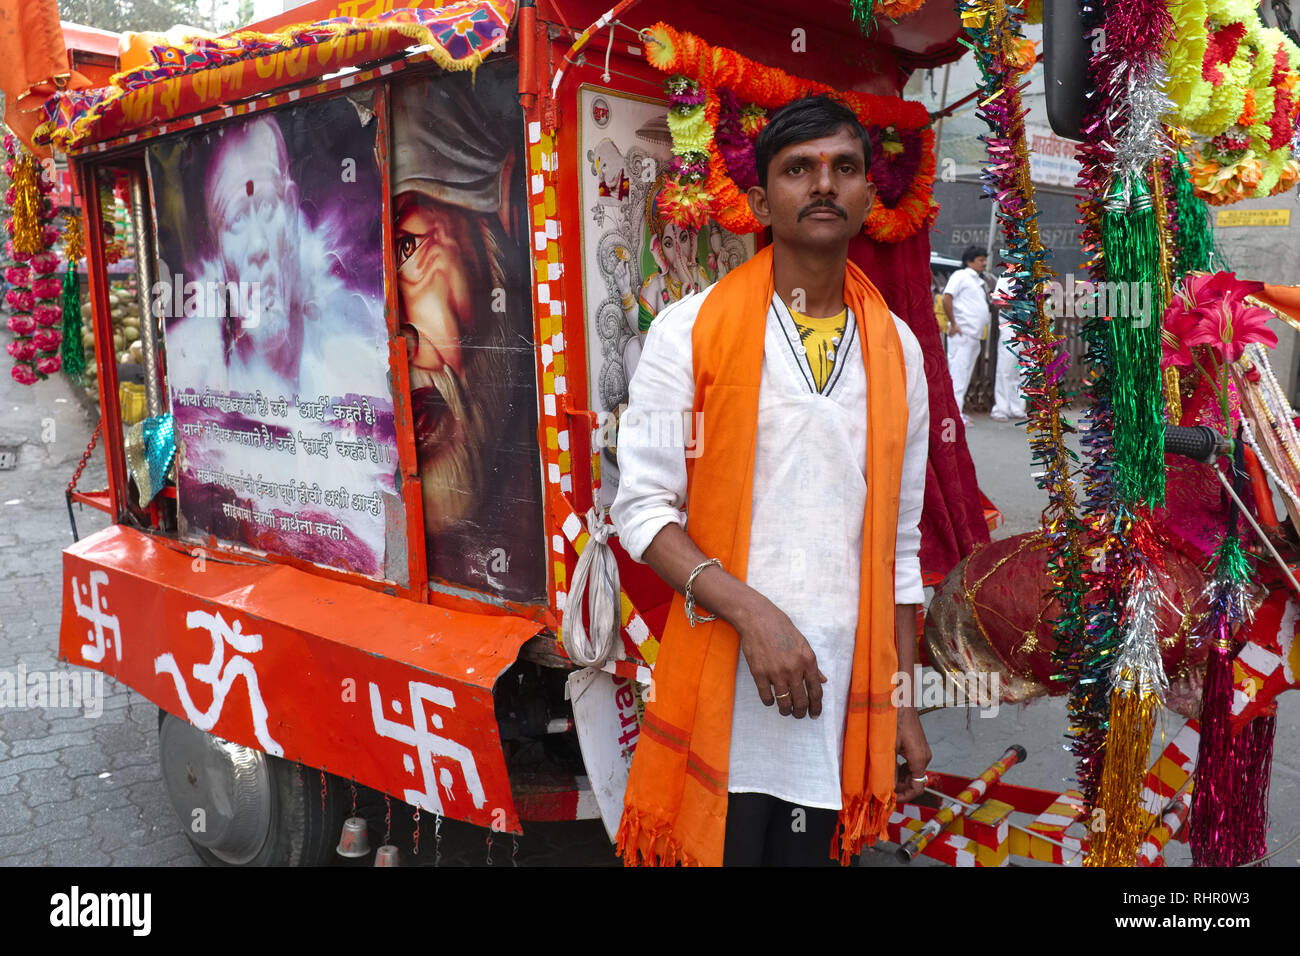 A man has turned his bicycle into a shrine to Indian saint Sai Baba of Shirdi, the shrine painted with an Om (Aum) symbol and swastikas; Mumbai, India Stock Photo